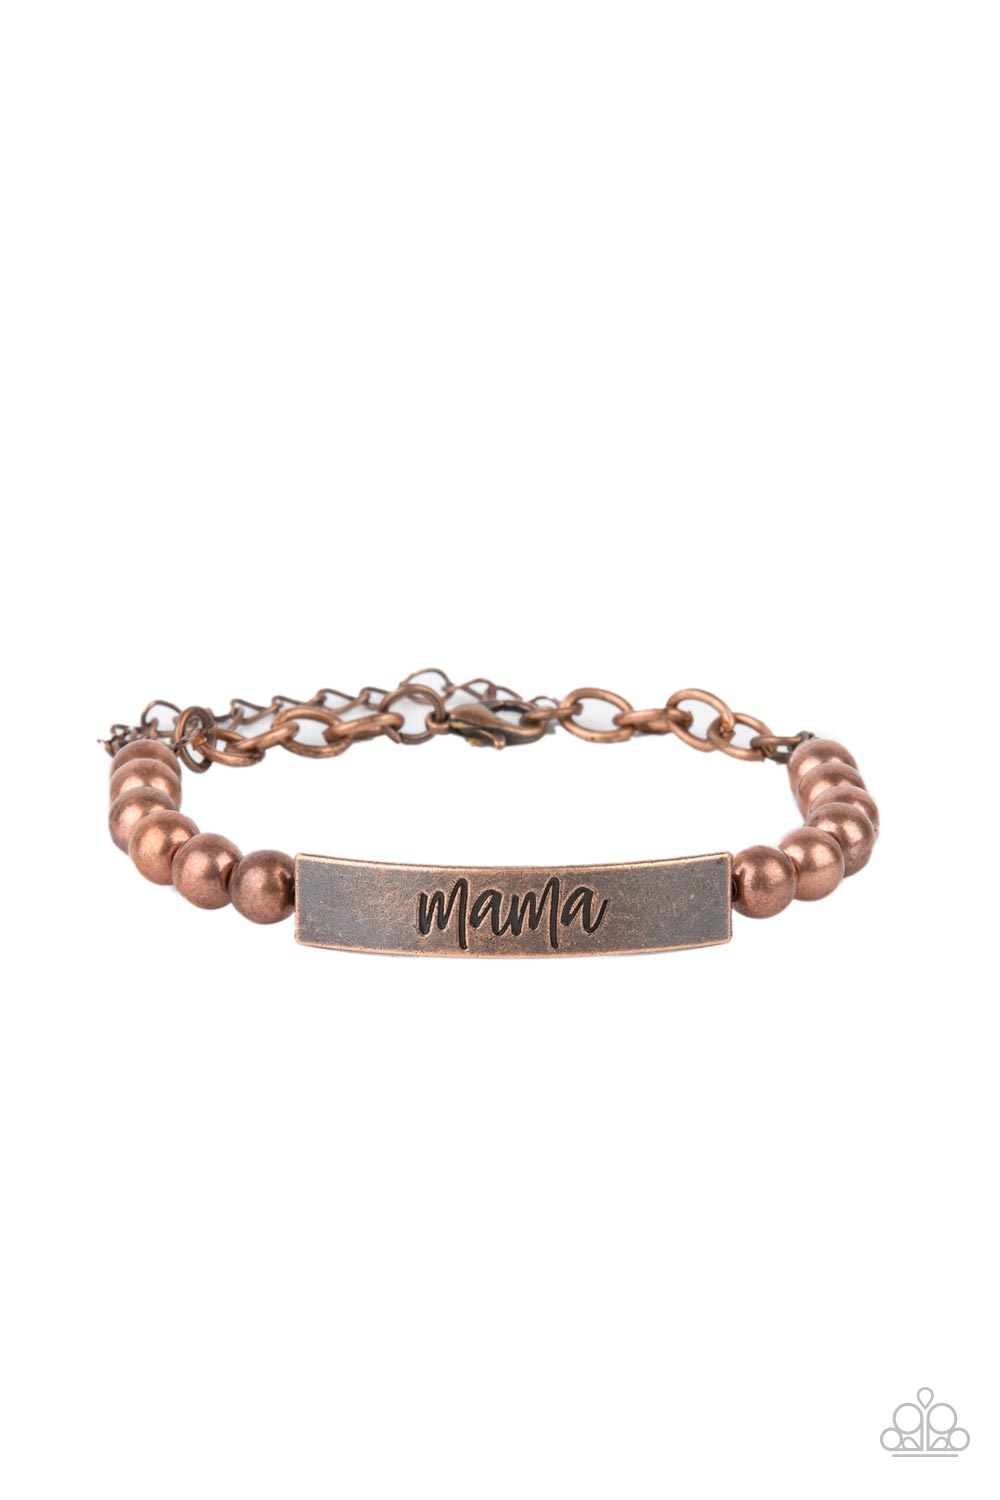 copper, copper jewelry, affordable jewelry, paparazzi accessories, everyday jewelry, mothers day jewelry, paparazzi accessories, gift, affordable gift, 